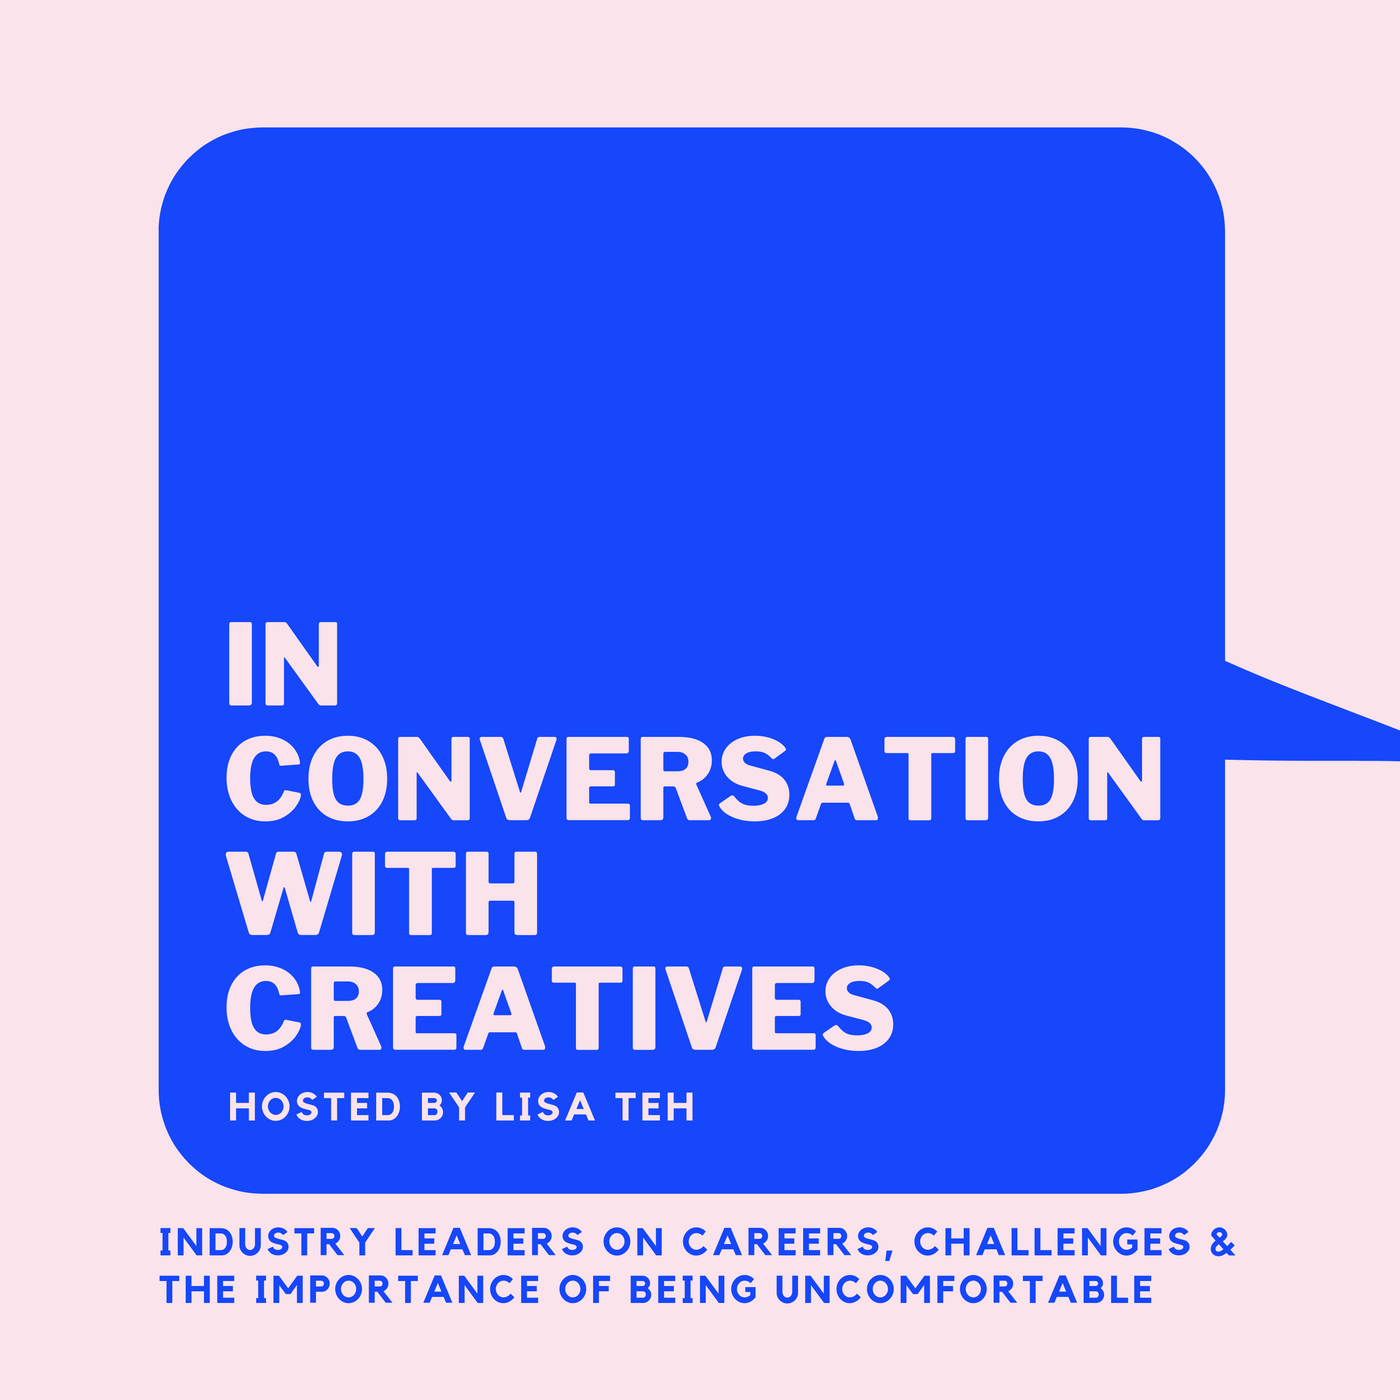 In Conversation With Creatives